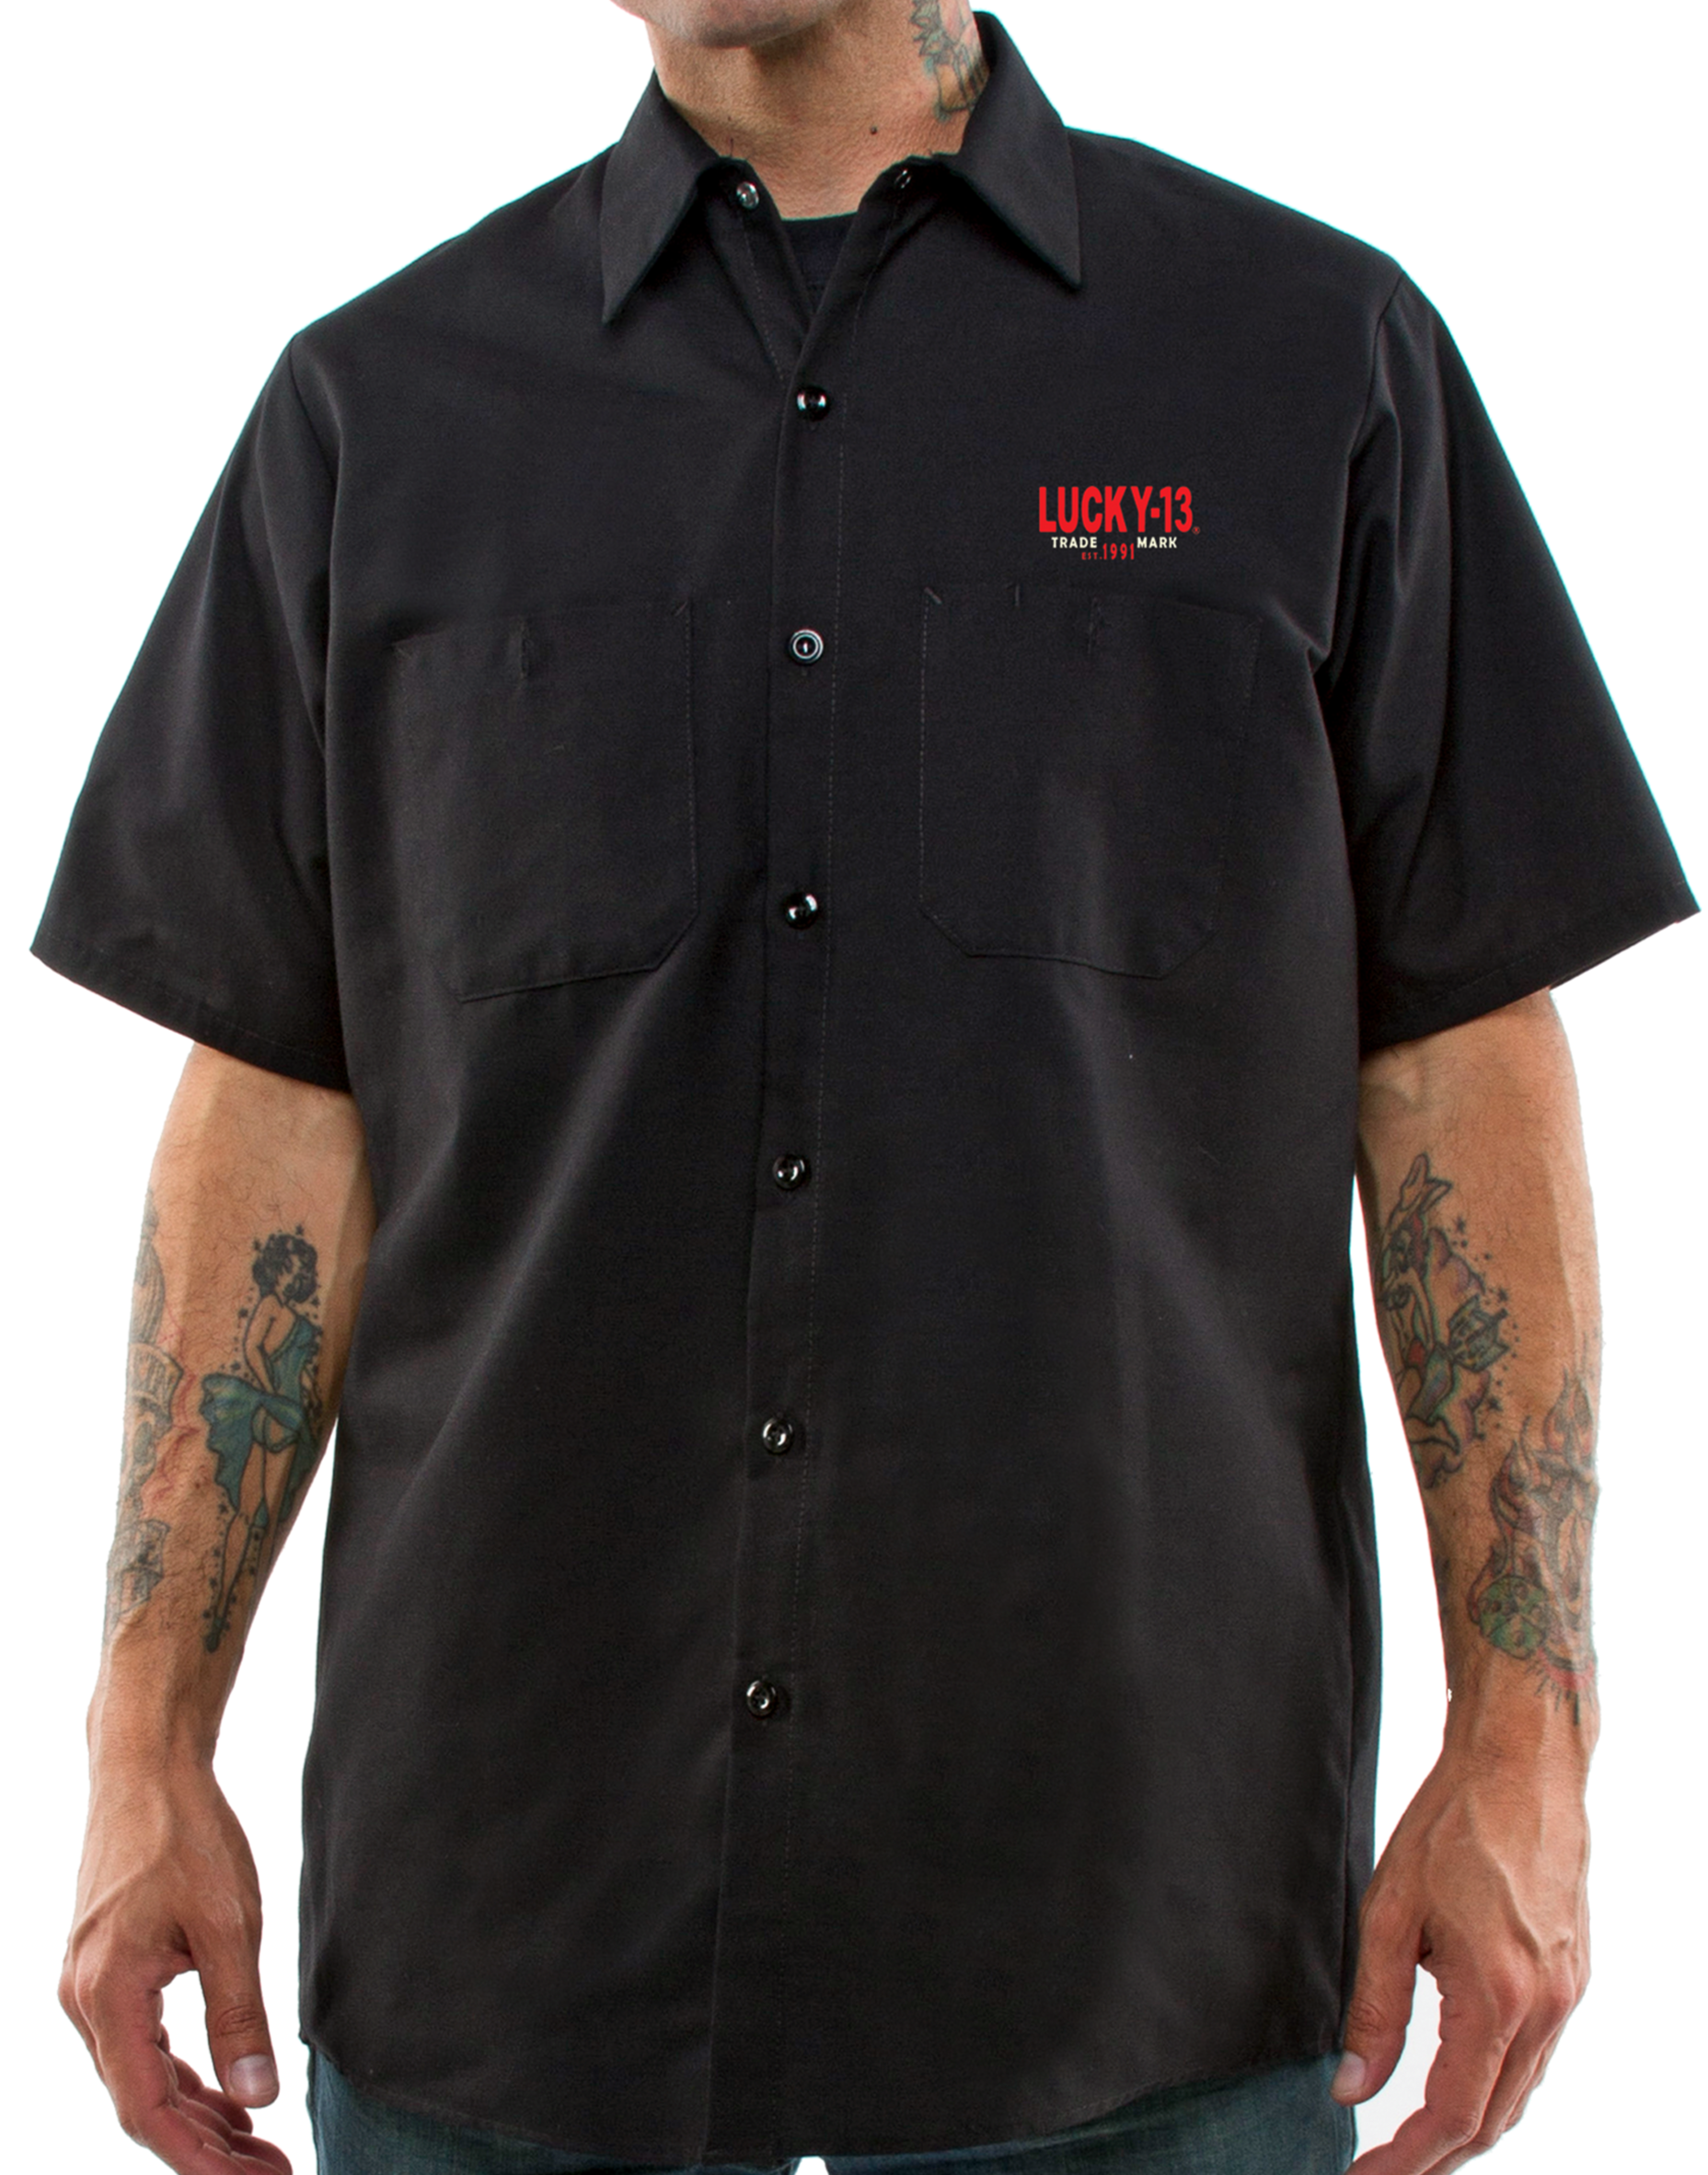 Set the pace for hard work under the hood wearing a personalized Hot Rod  Garage work shirt. You will be ready to hit the road before you know it  with